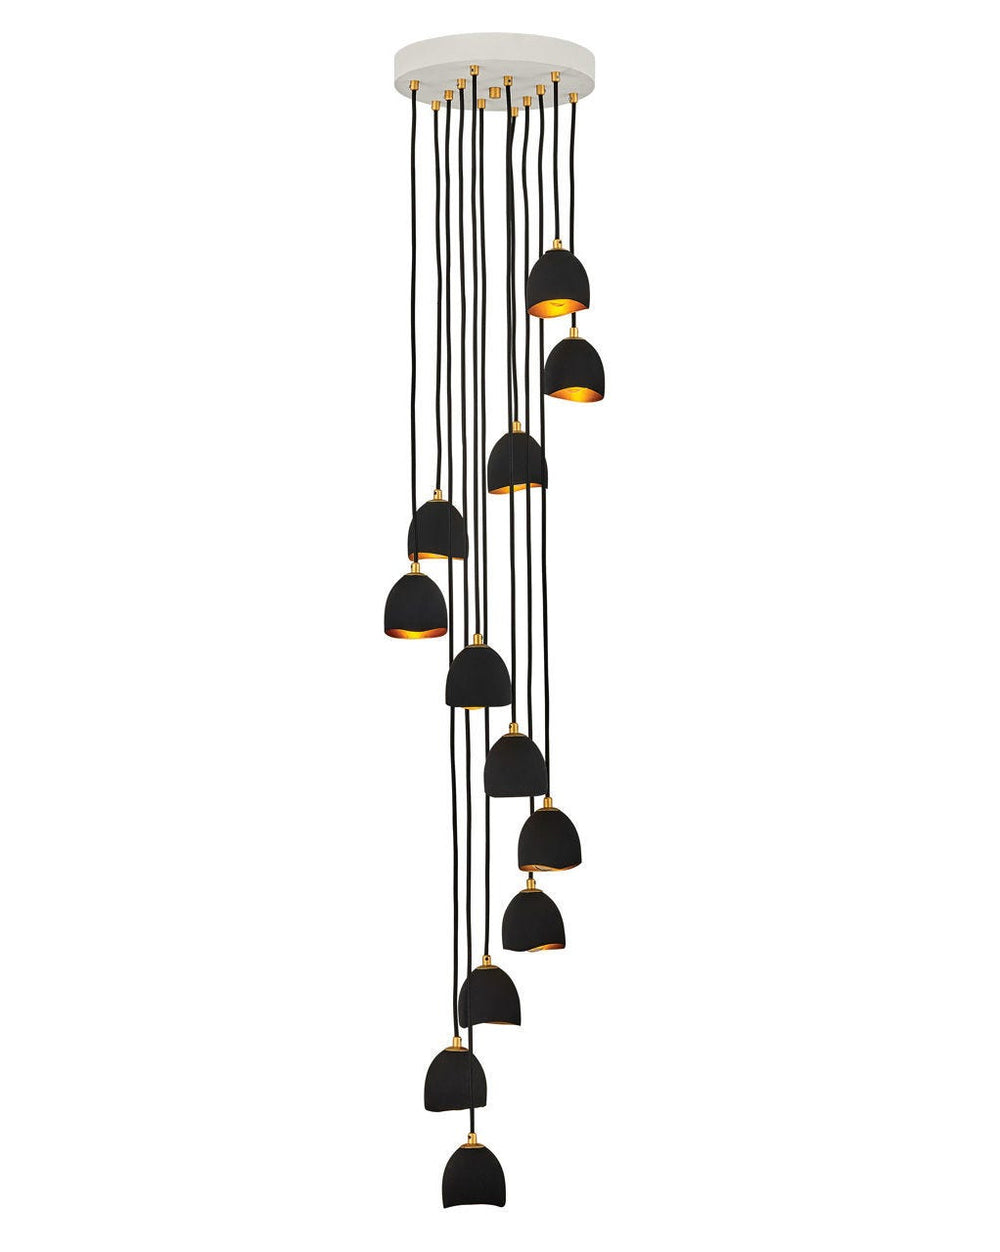 Nula Large Multi Tier-Hinkley Lighting-HINKLEY-35908SHB-ChandeliersShell Black with Gold Leaf accents-2-France and Son